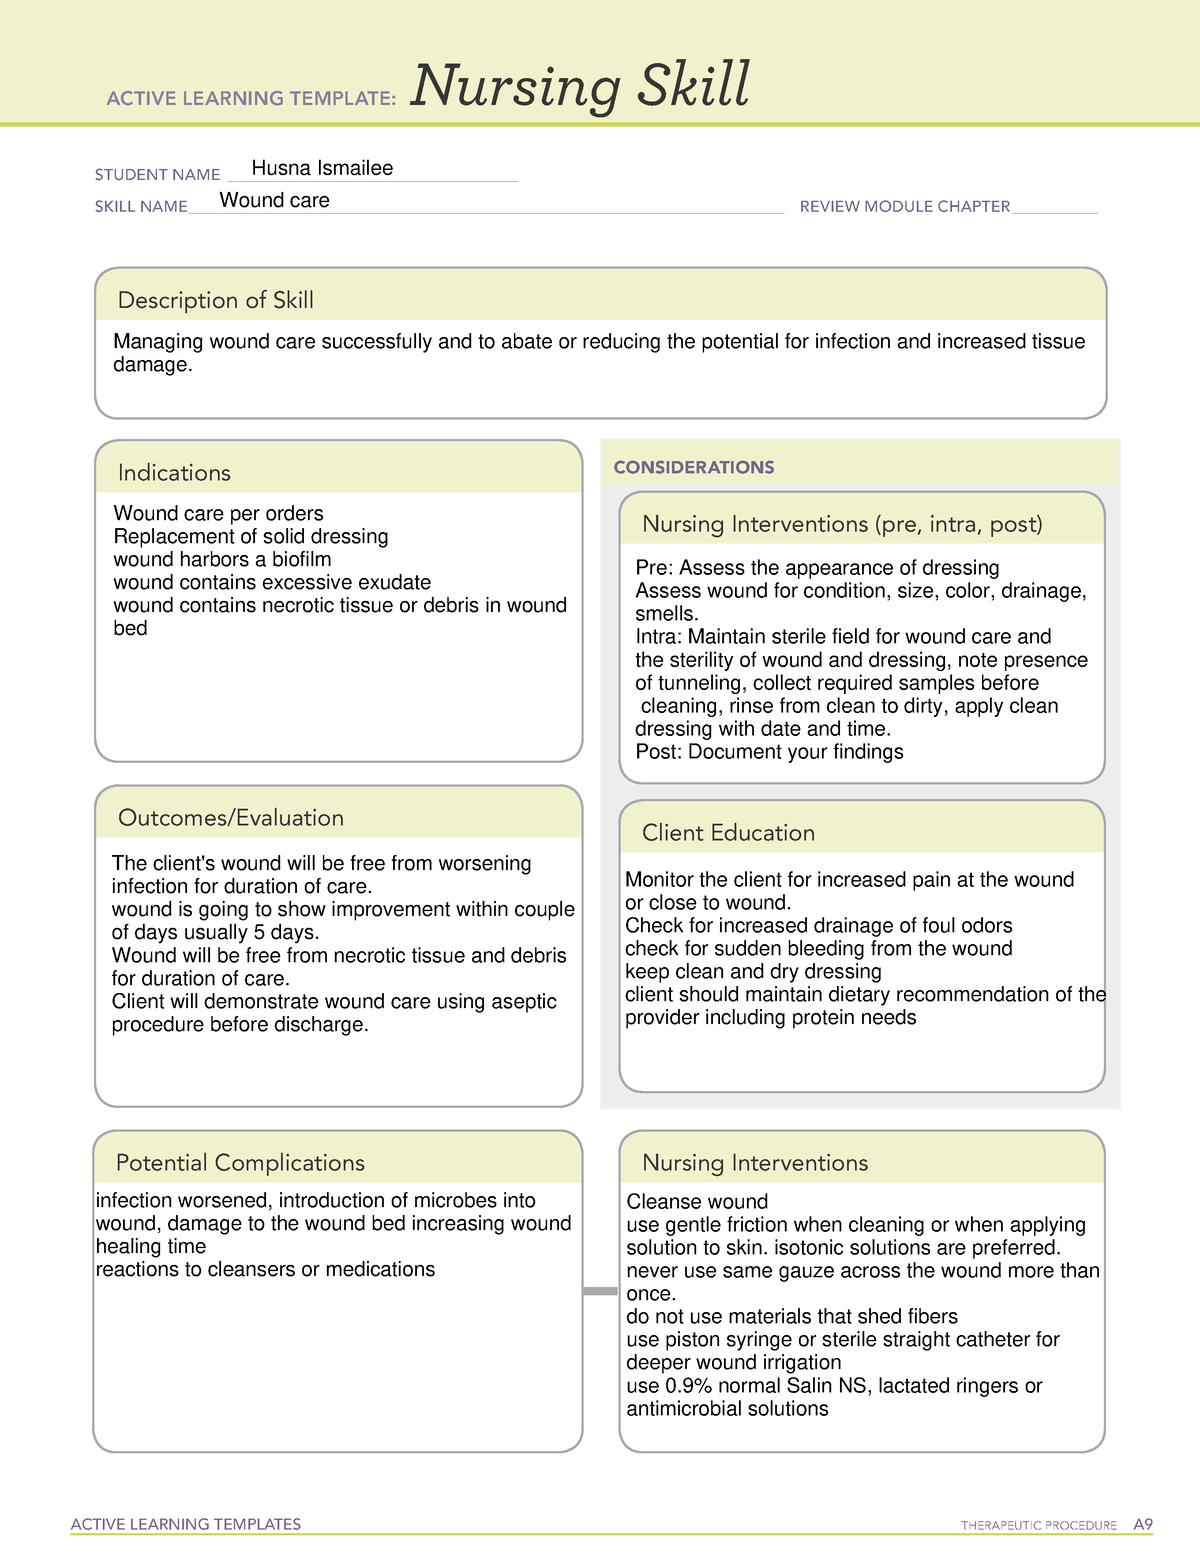 active-learning-template-nursing-skill-wound-active-learning-templates-therapeutic-procedure-a